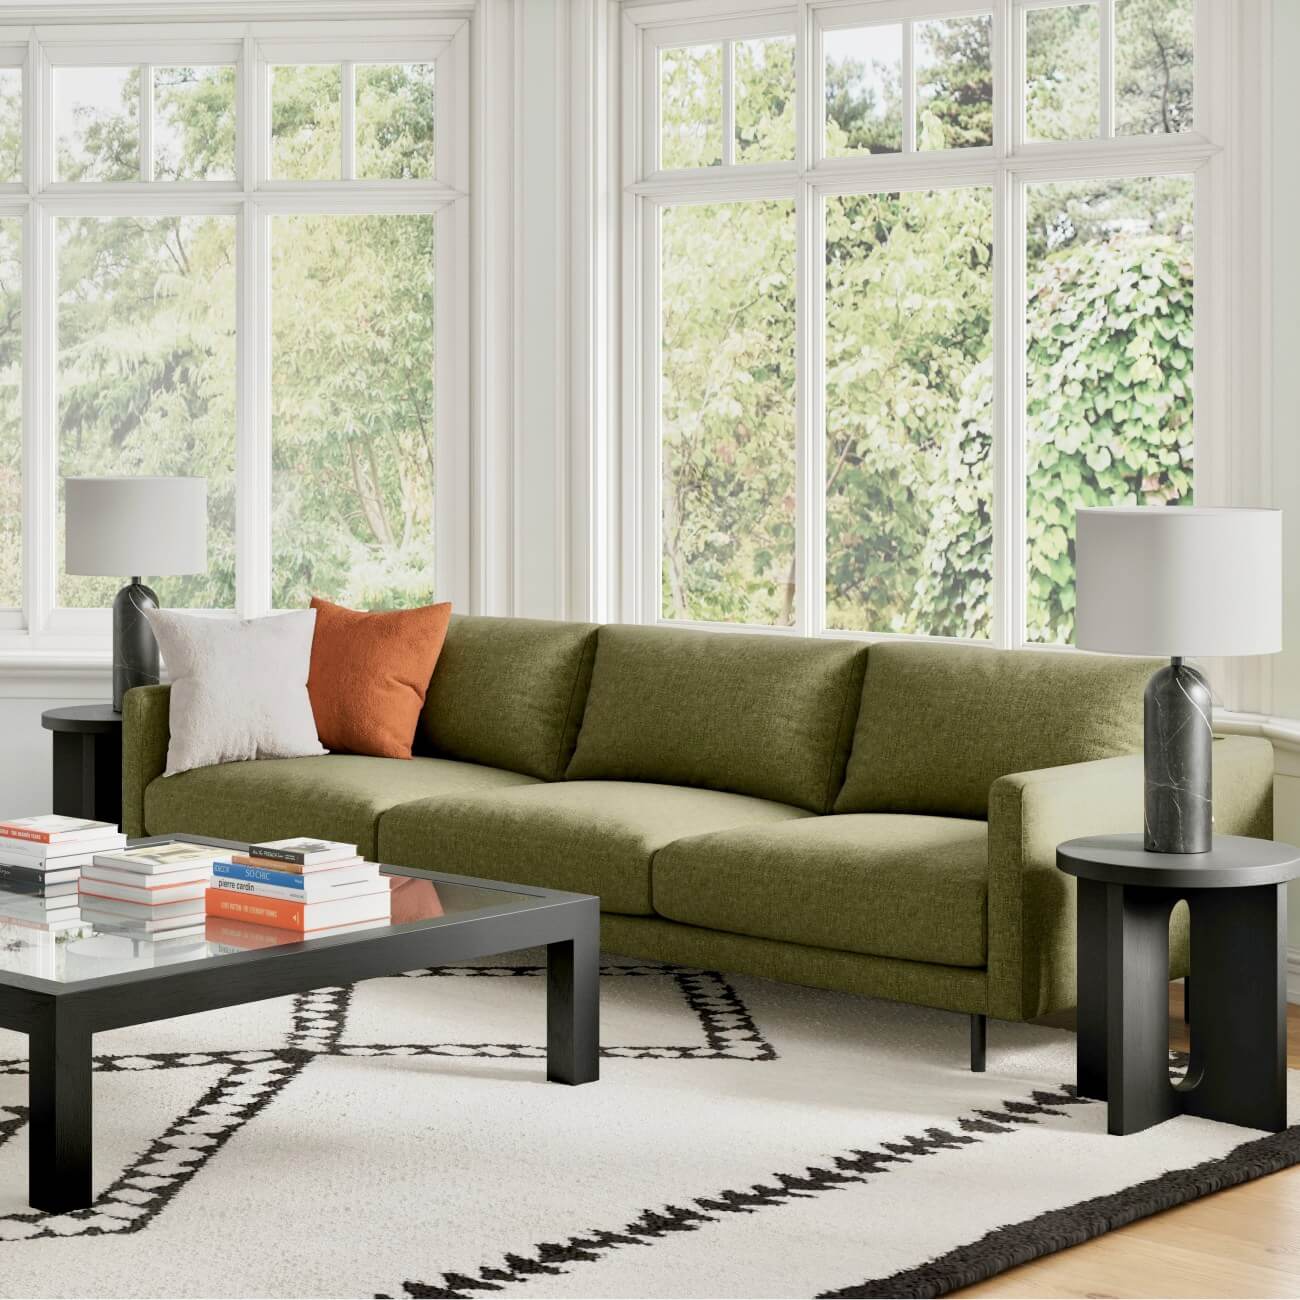 Green three seater sofa in attractive living room with large windows